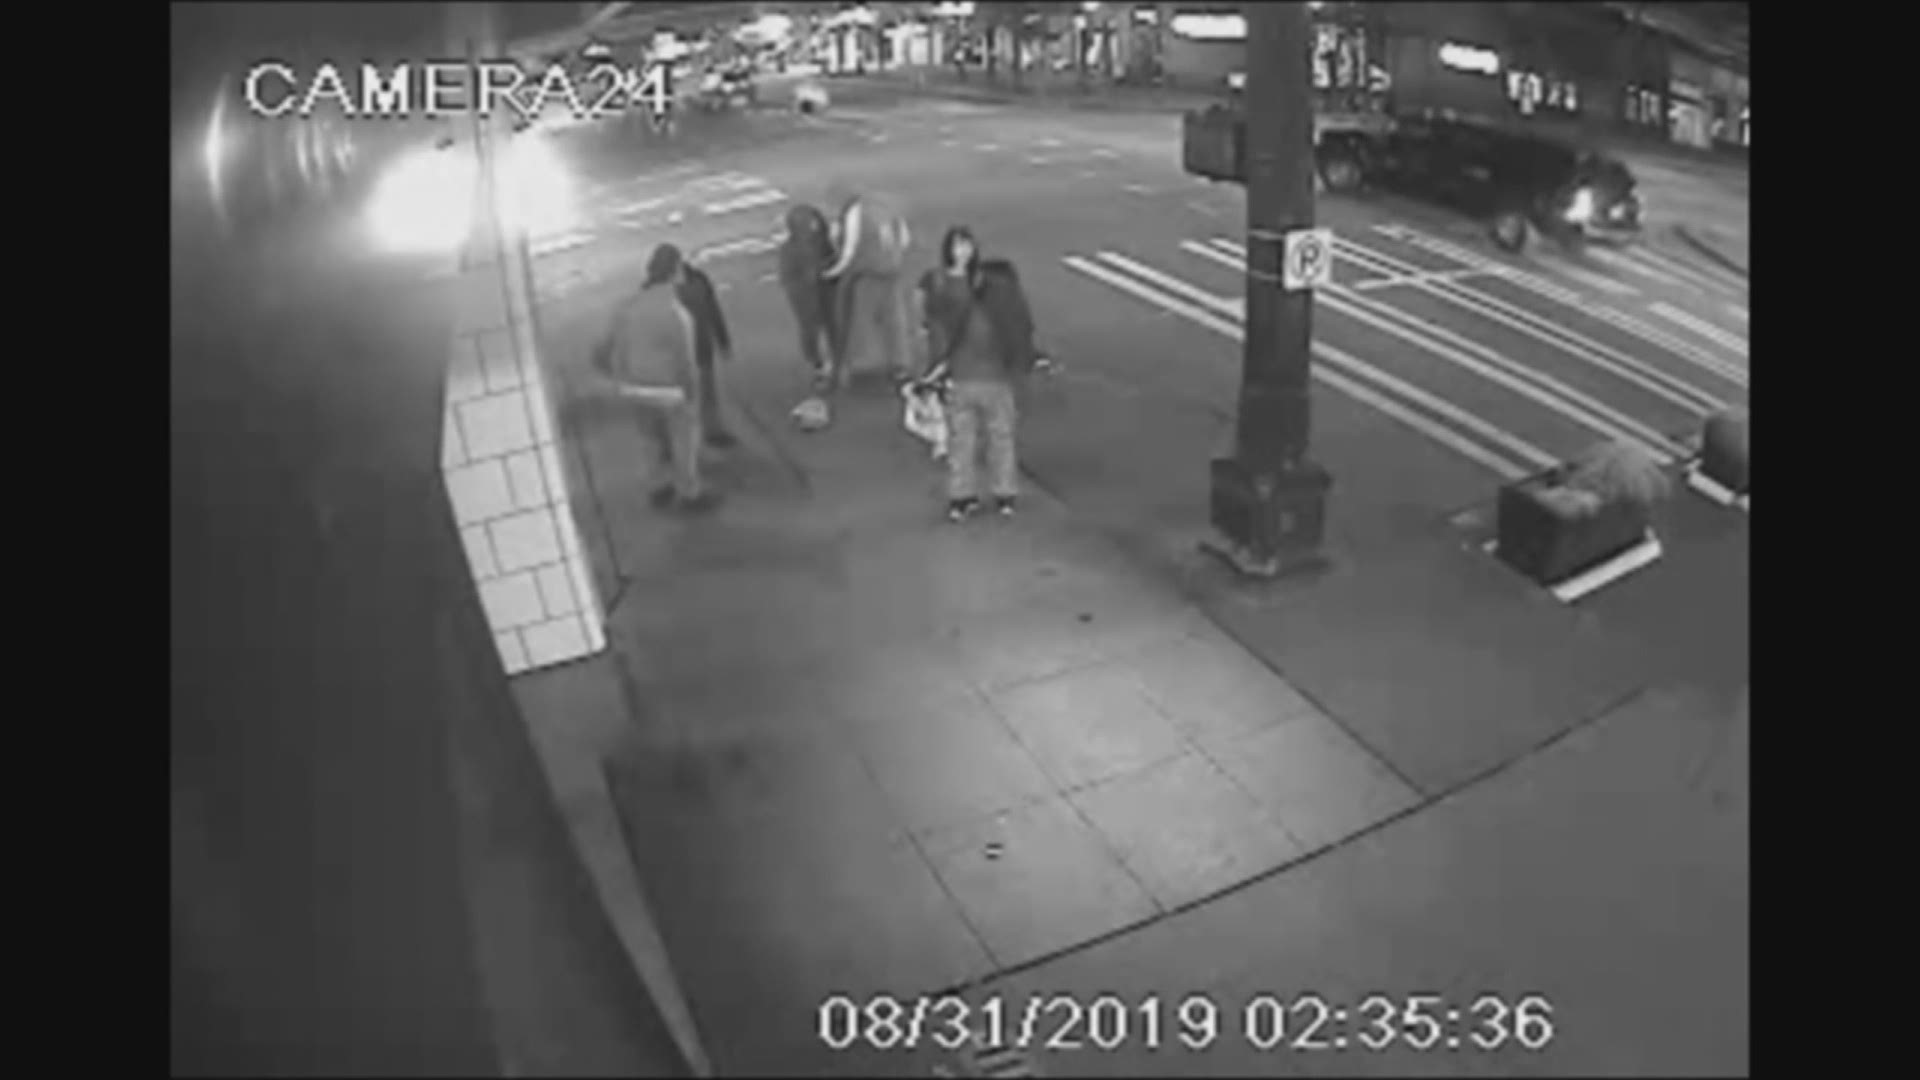 Seattle police are asking for the public’s help identifying three suspects in an attempted carjacking that happened in downtown Seattle on August 31, 2019.